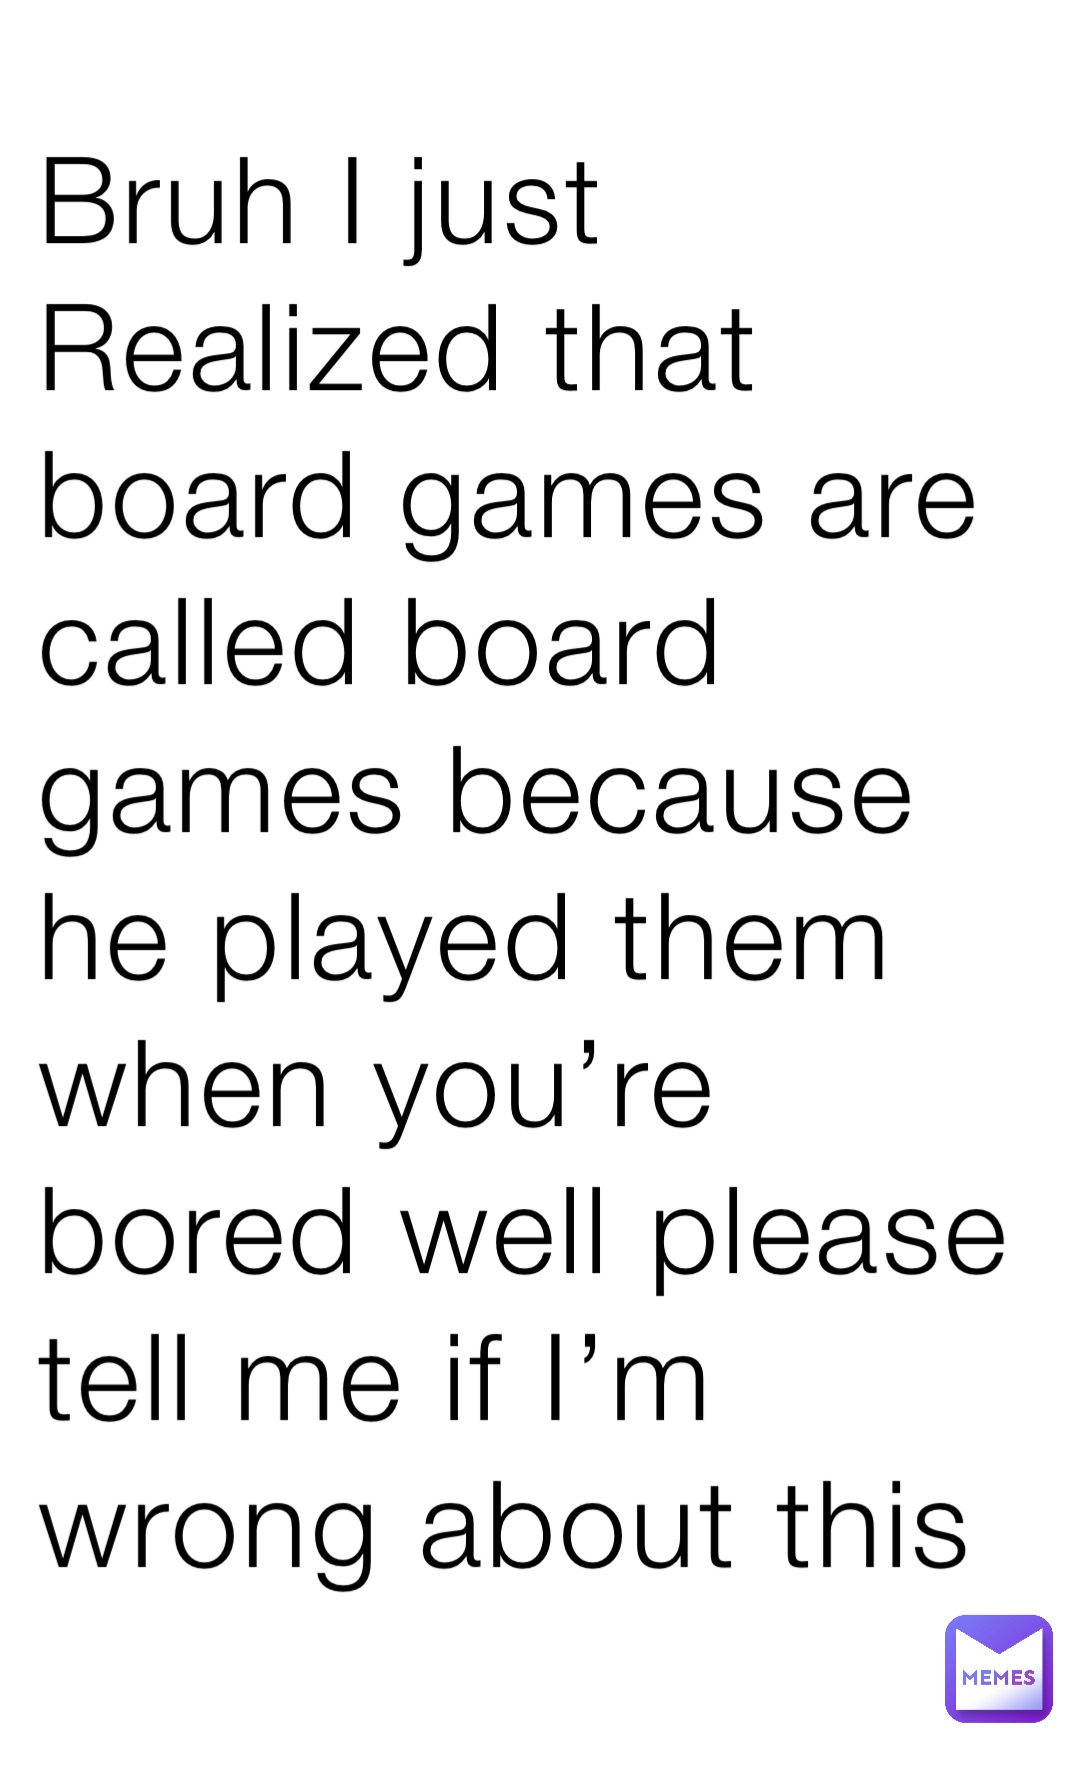 Bruh I just Realized that board games are called board games because he played them when you’re bored well please tell me if I’m wrong about this